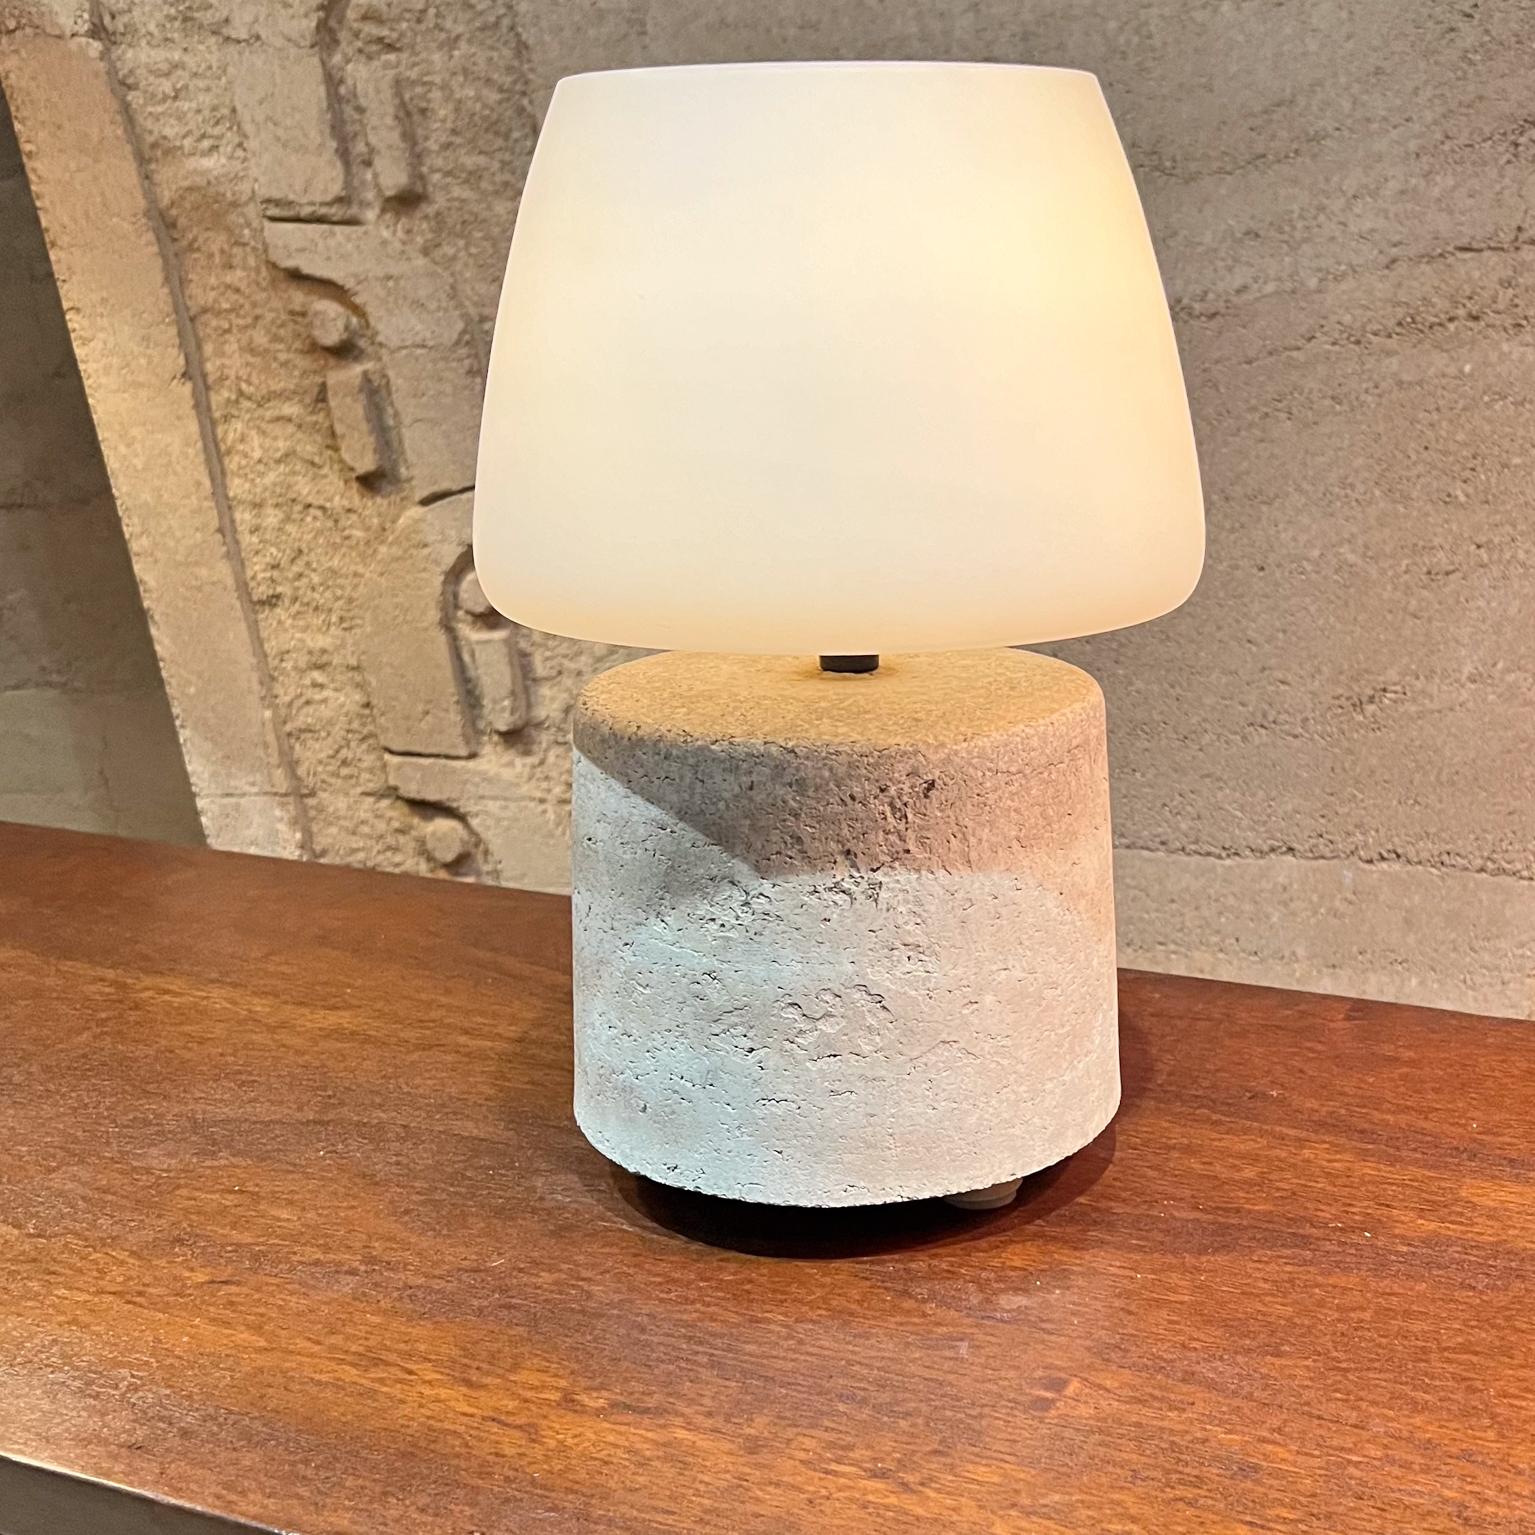 Studio Table Lamp Rammed Raw Earth Base meets Midcentury Frosted Glass Sculptural Shade.
14 h x 9.25 diameter
One of kind.
Original vintage with new cord, new socket. Ready to go.
Refer to images provided please.